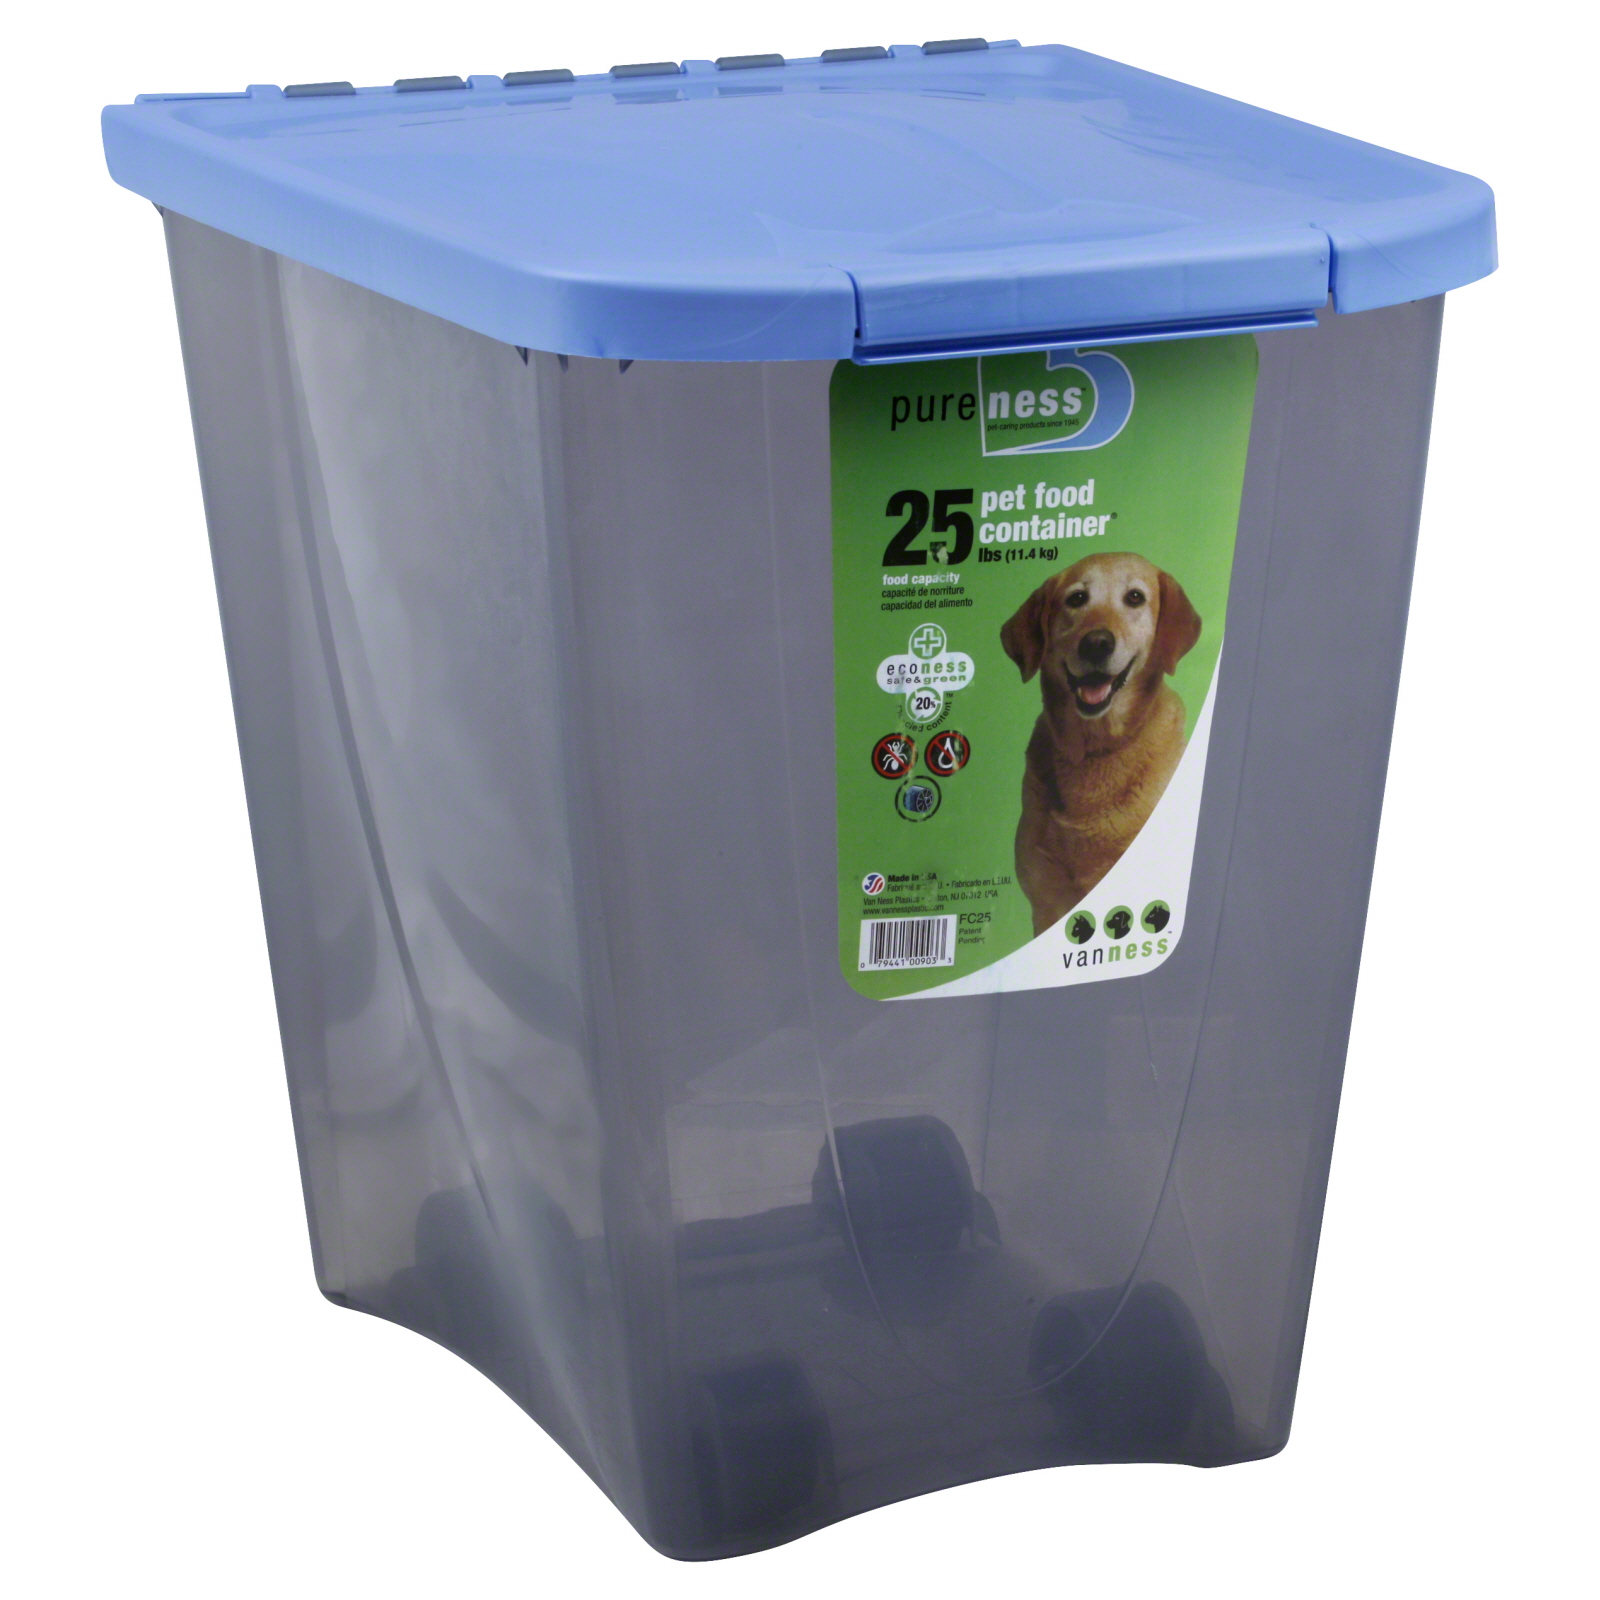 Van Ness Products Pet Food Storage Container 25 pound